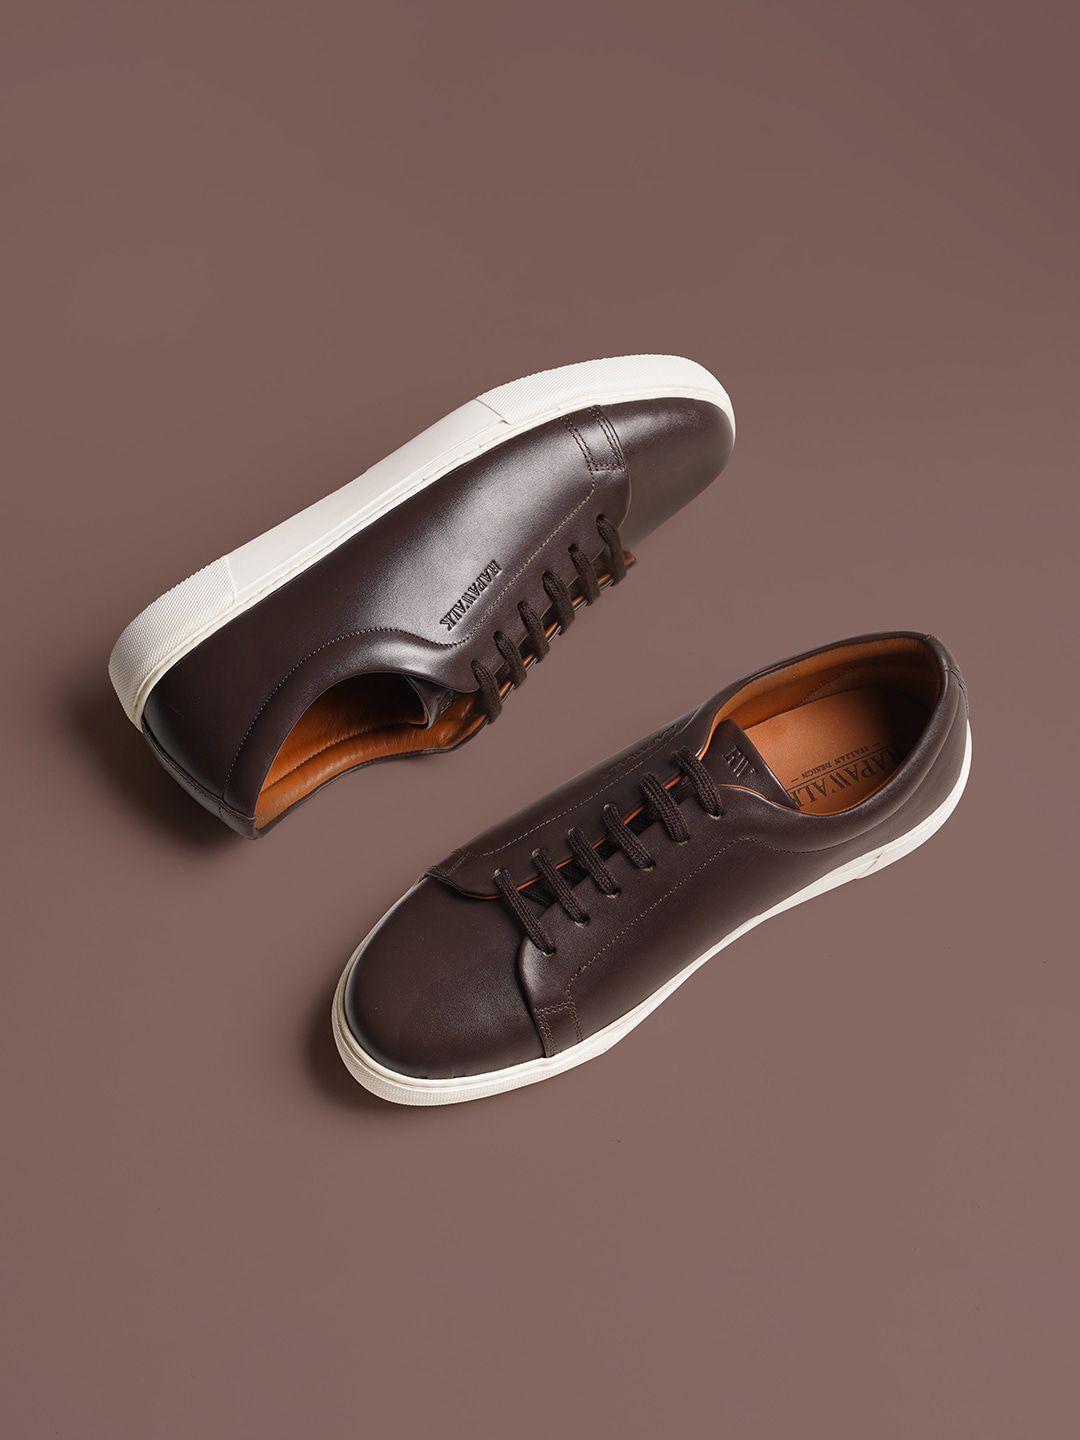 RAPAWALK Men Solid Leather Lace-Up Sneakers